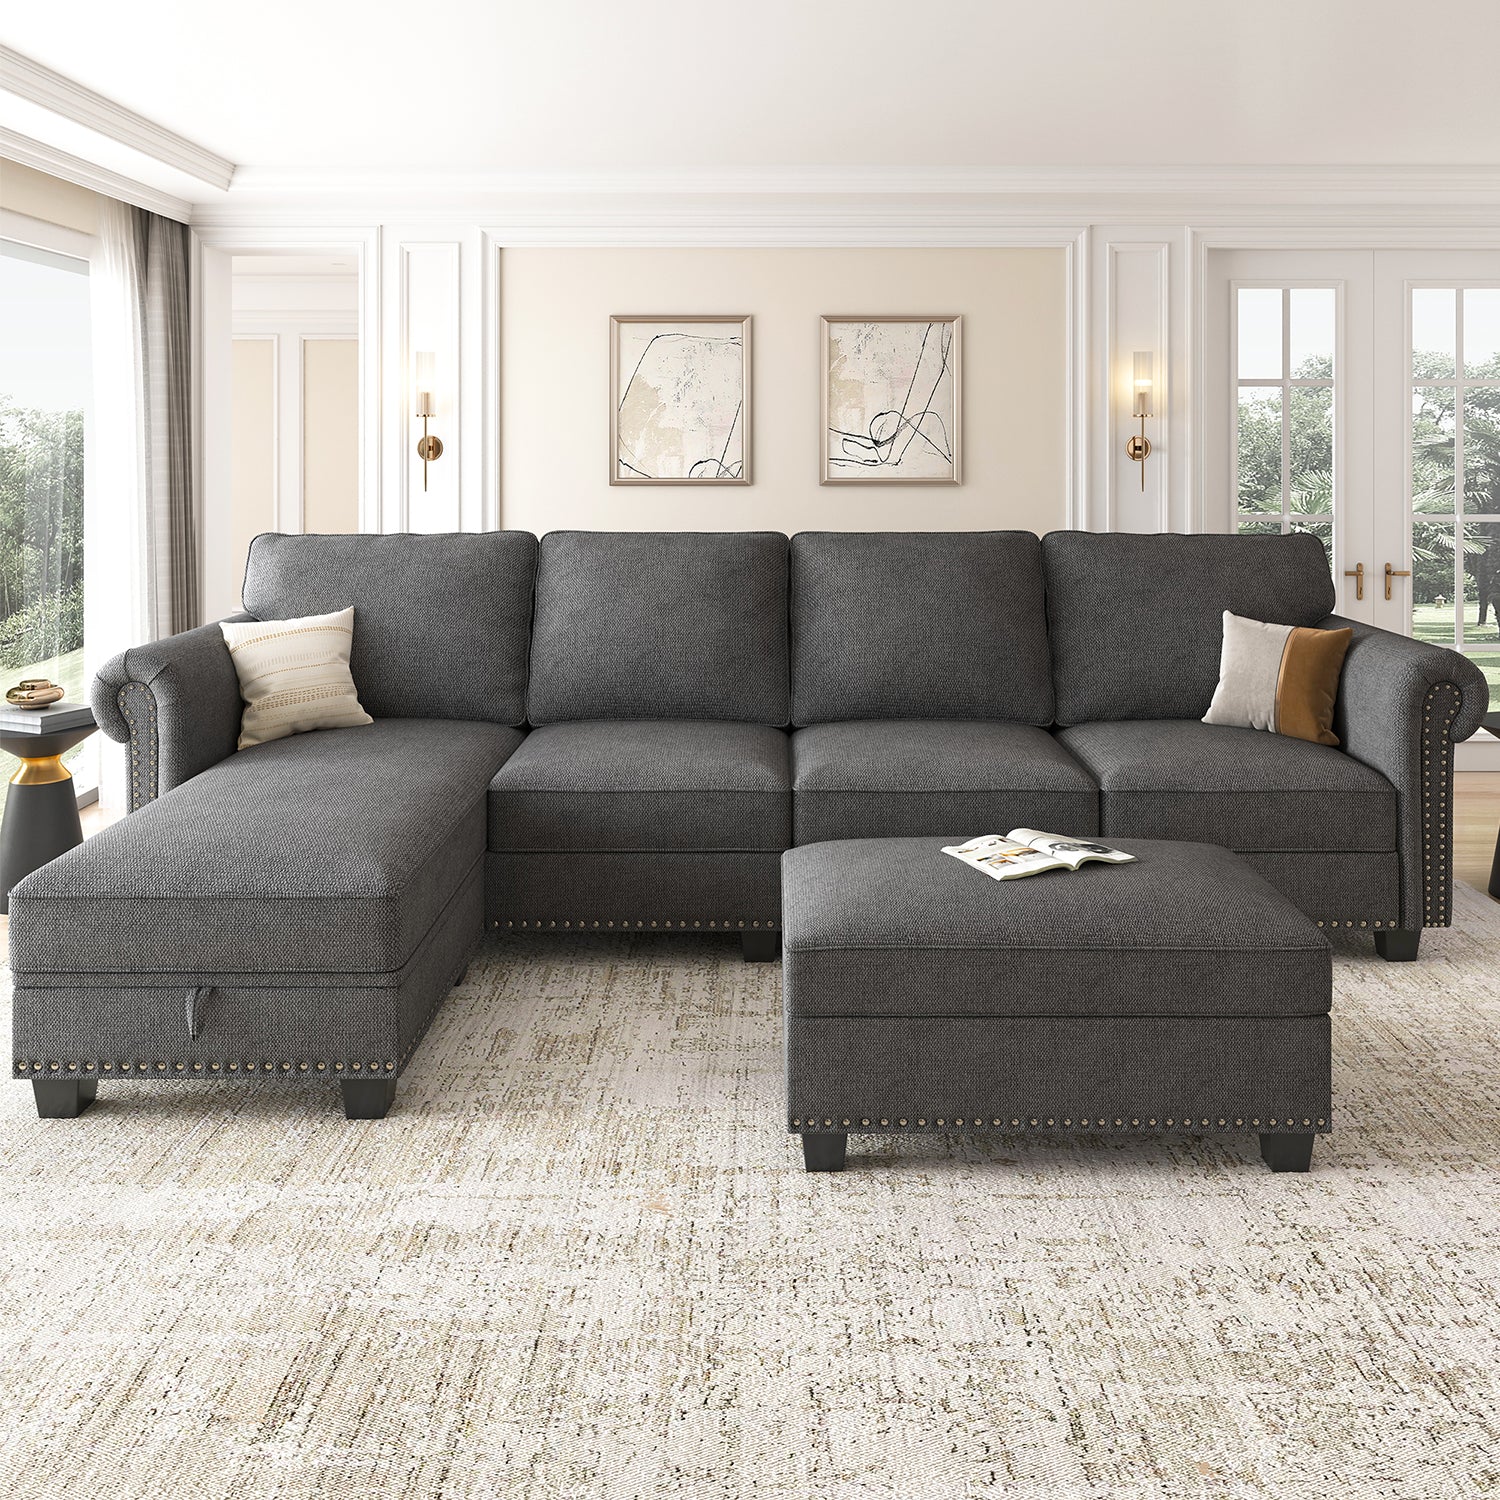 NOLANY Fabric 4 Seaters L-Shaped Sectional Sofa with Storage Ottoman